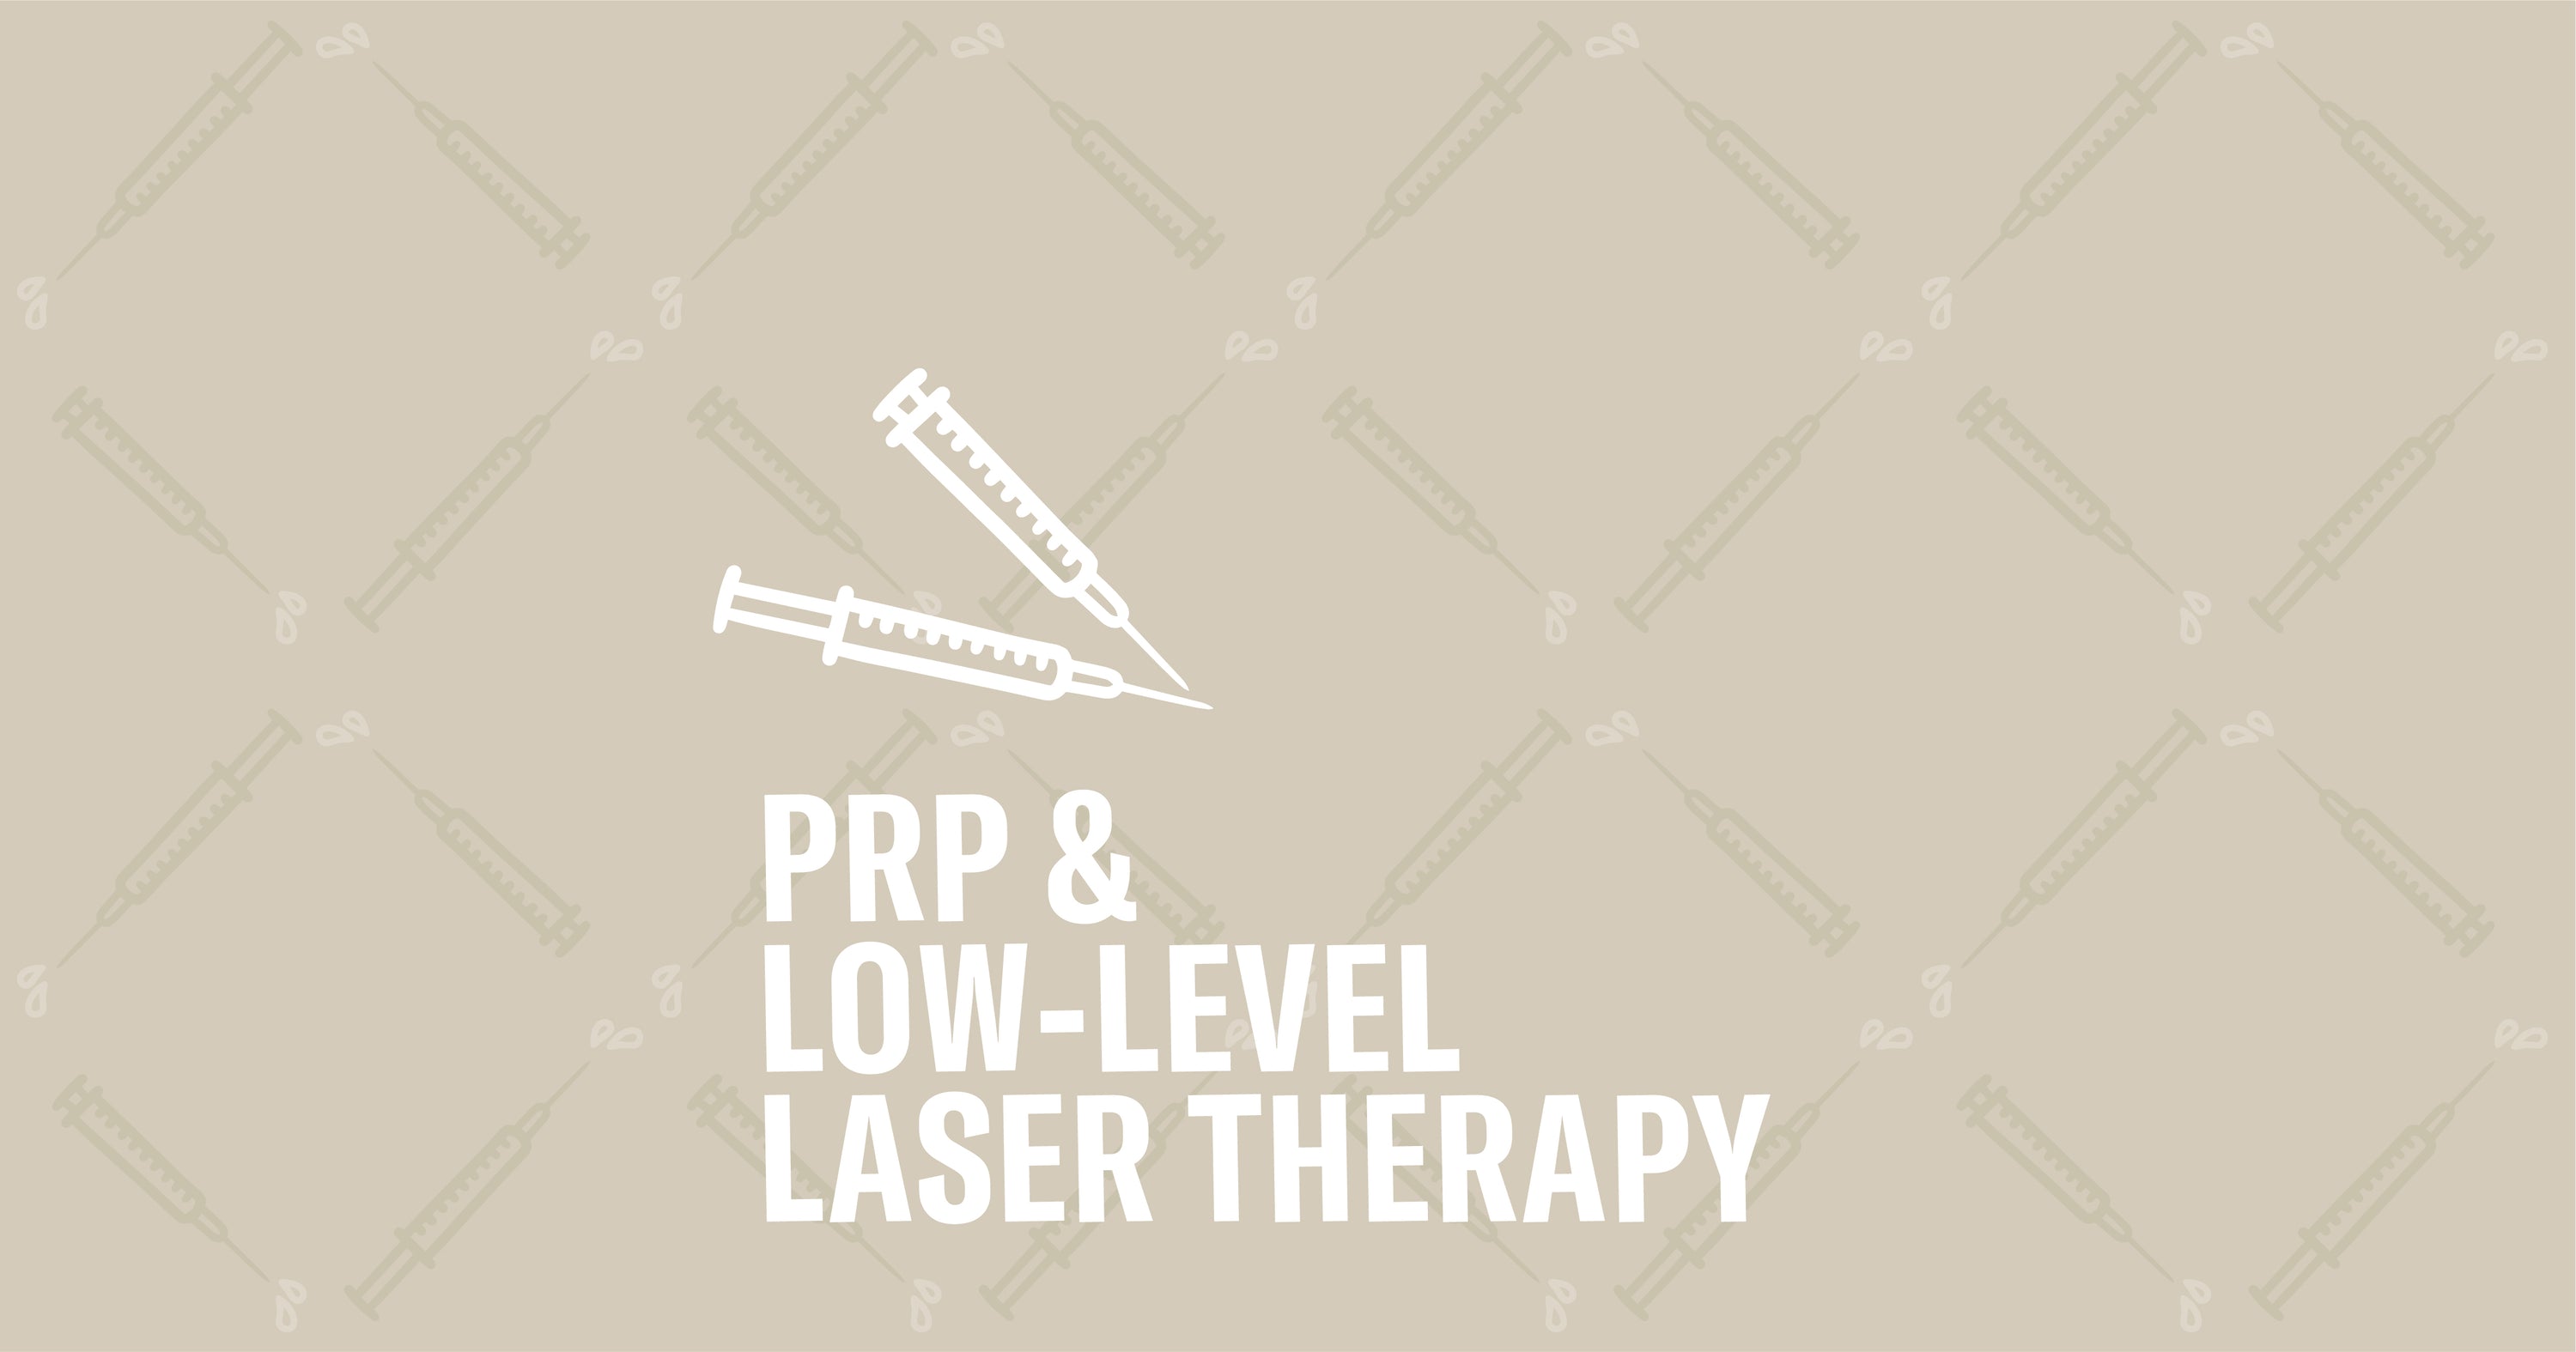 Does PRP or Low-level Laser Therapy Treat Hair Loss?